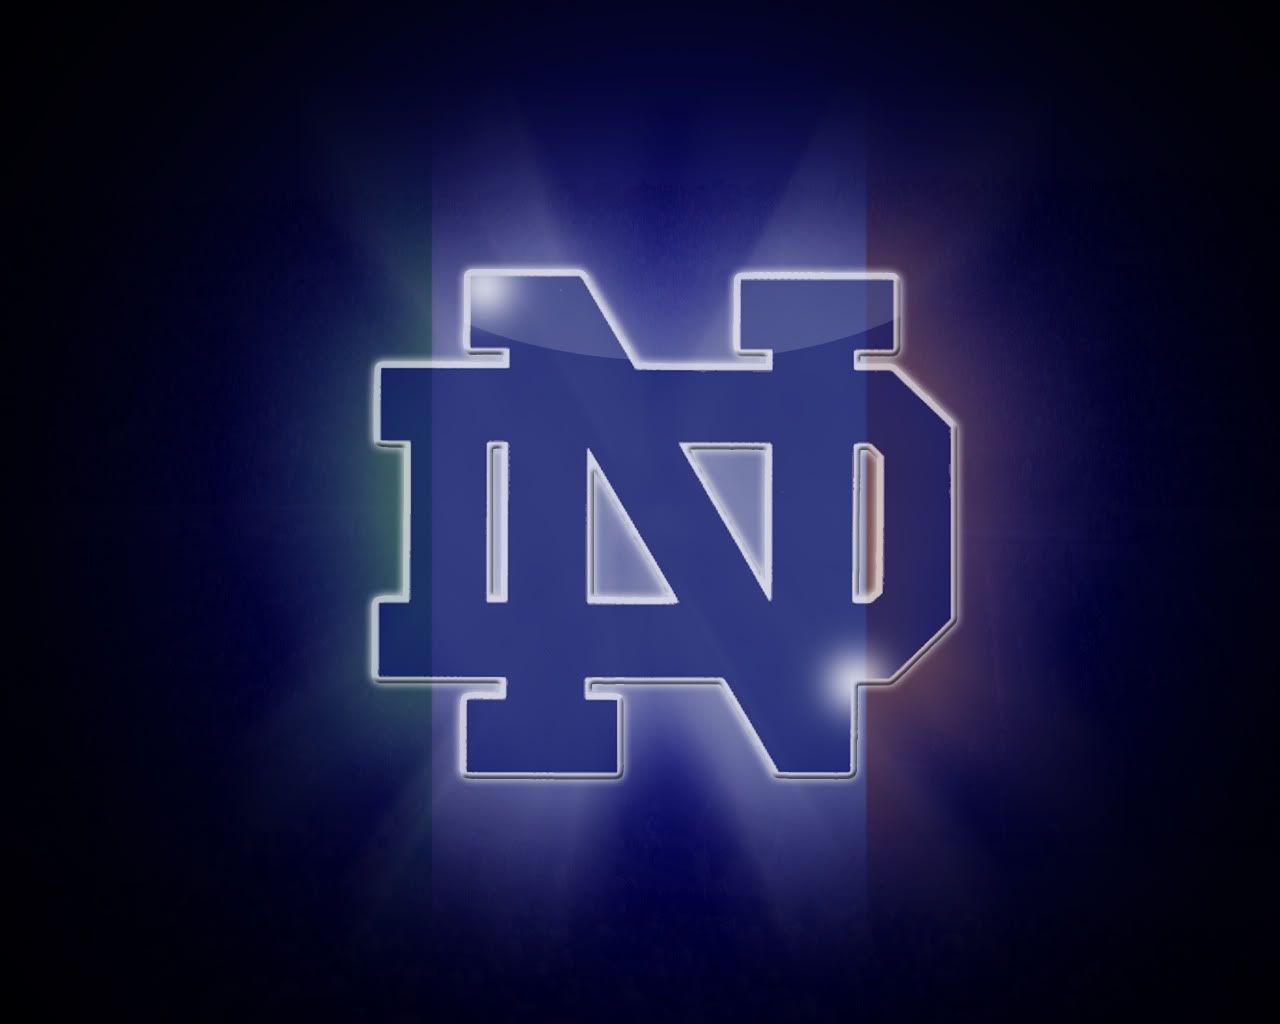 Set of 12 Officially NCAA Licensed Notre Dame Fighting Irish iPhone  Wallpaper  Notre dame fighting irish Notre dame wallpaper Notre dame  fighting irish football